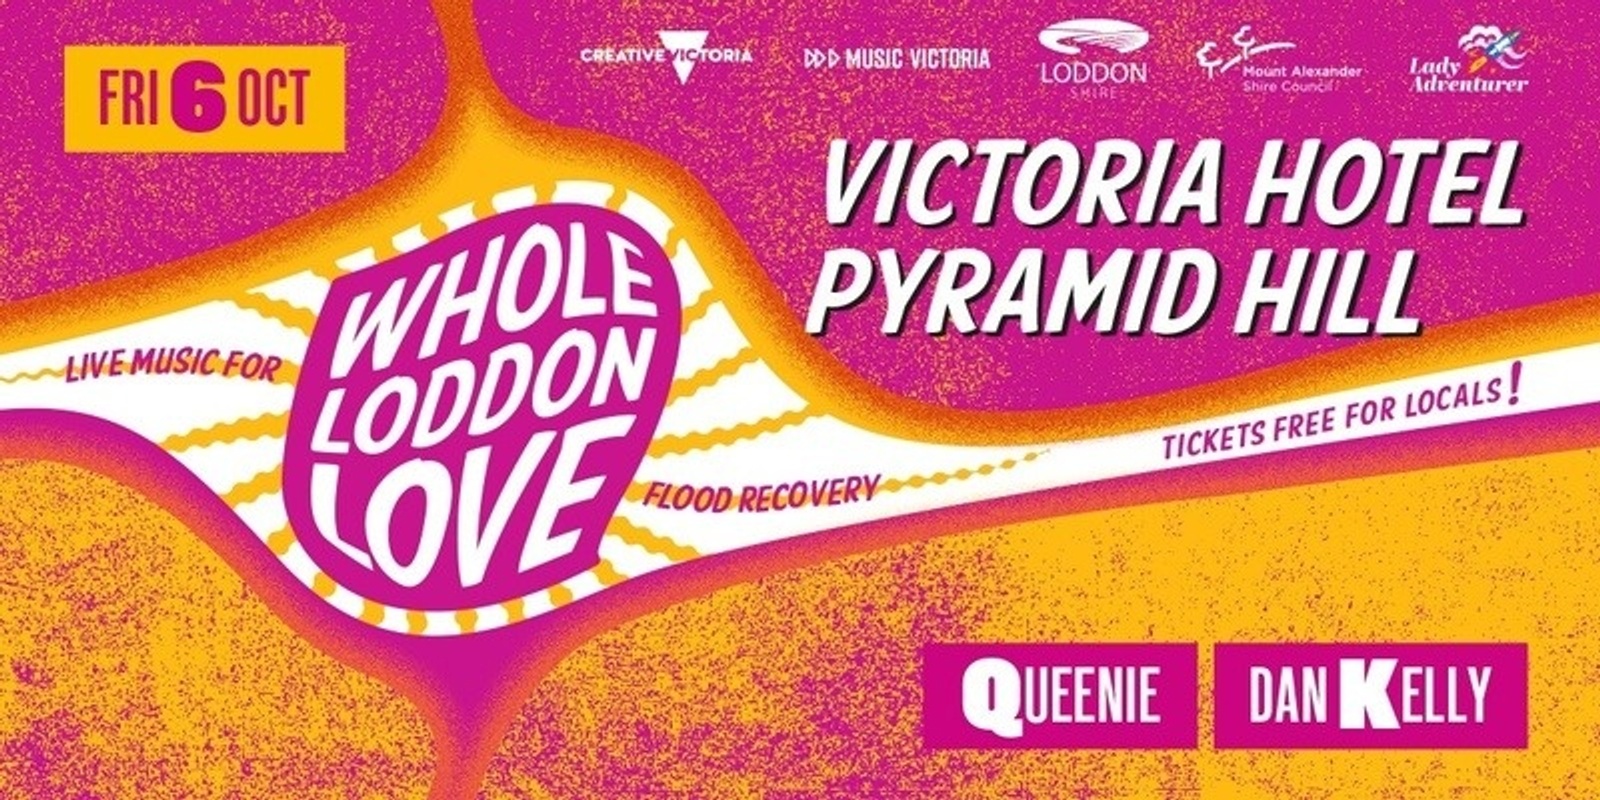 Banner image for Whole Loddon Love: Pyramid Hill